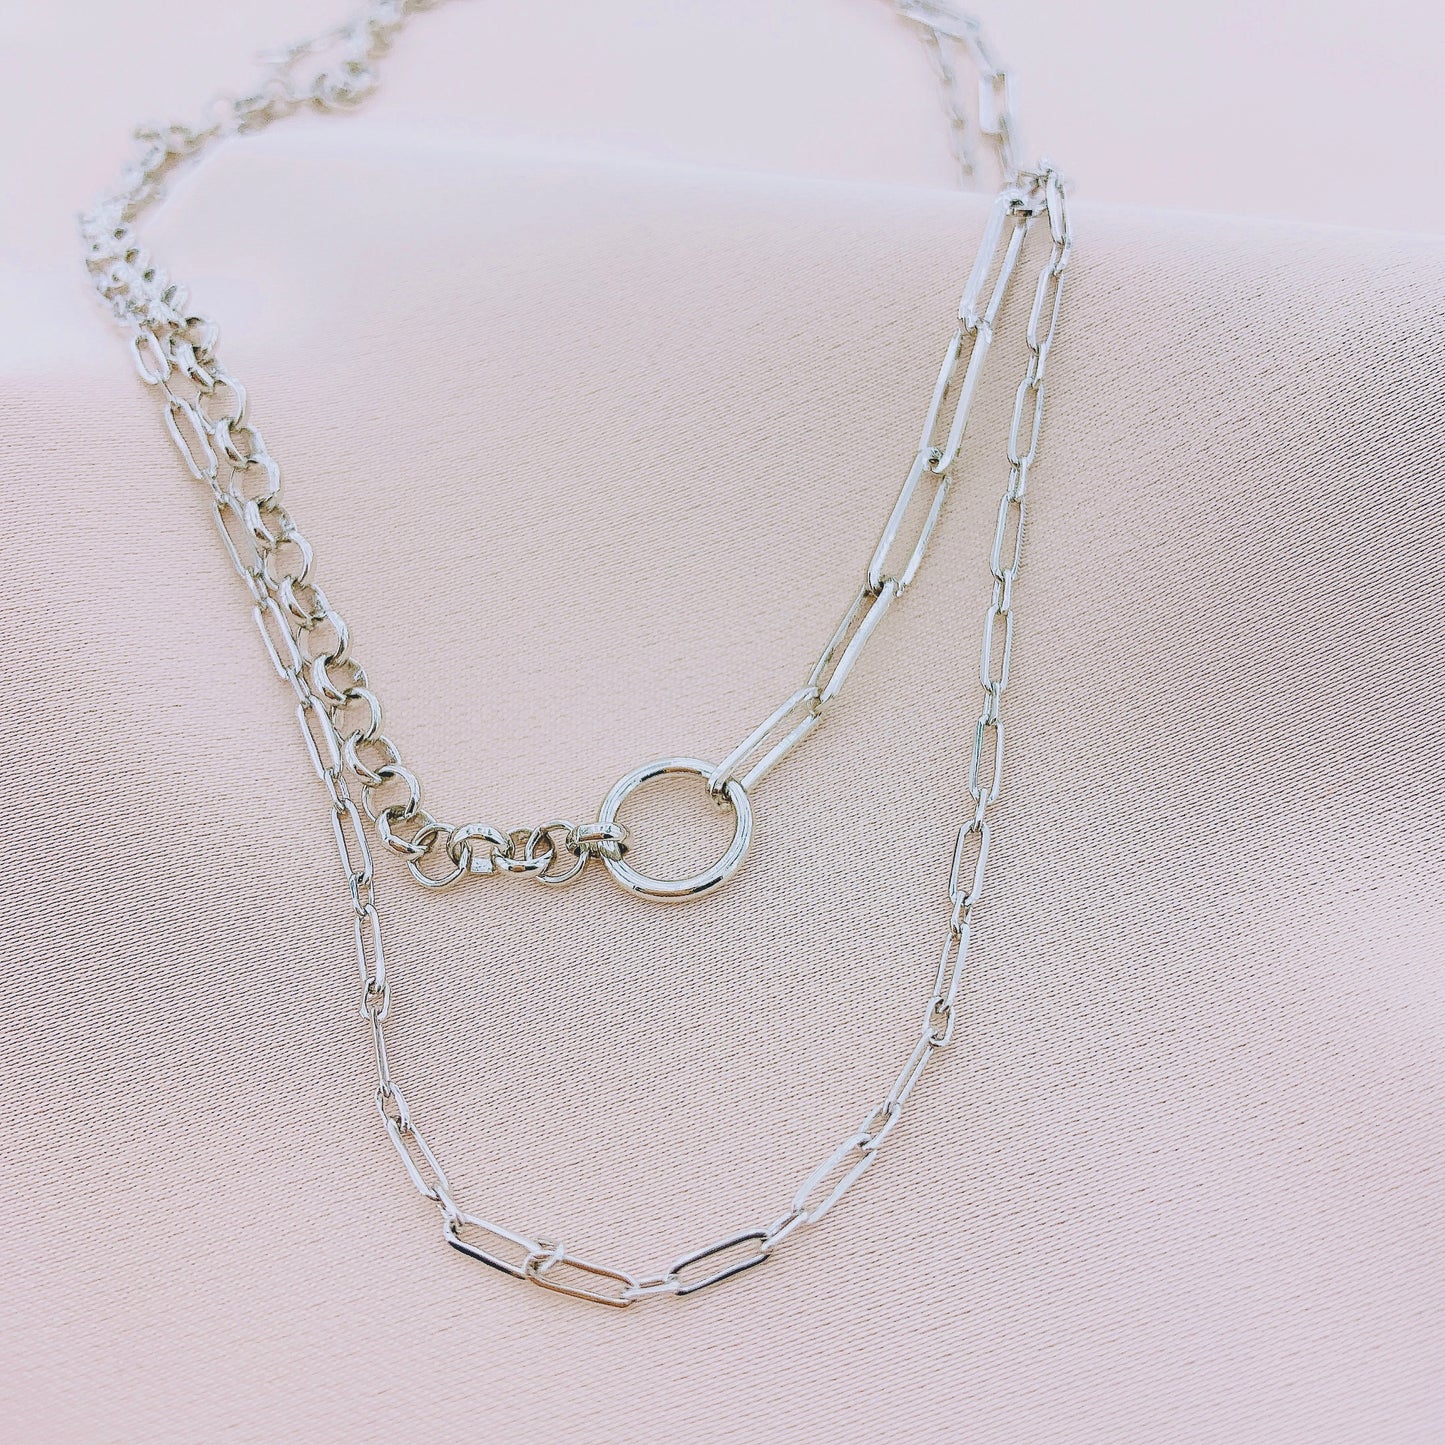 Women's Long Layer Chain Necklace